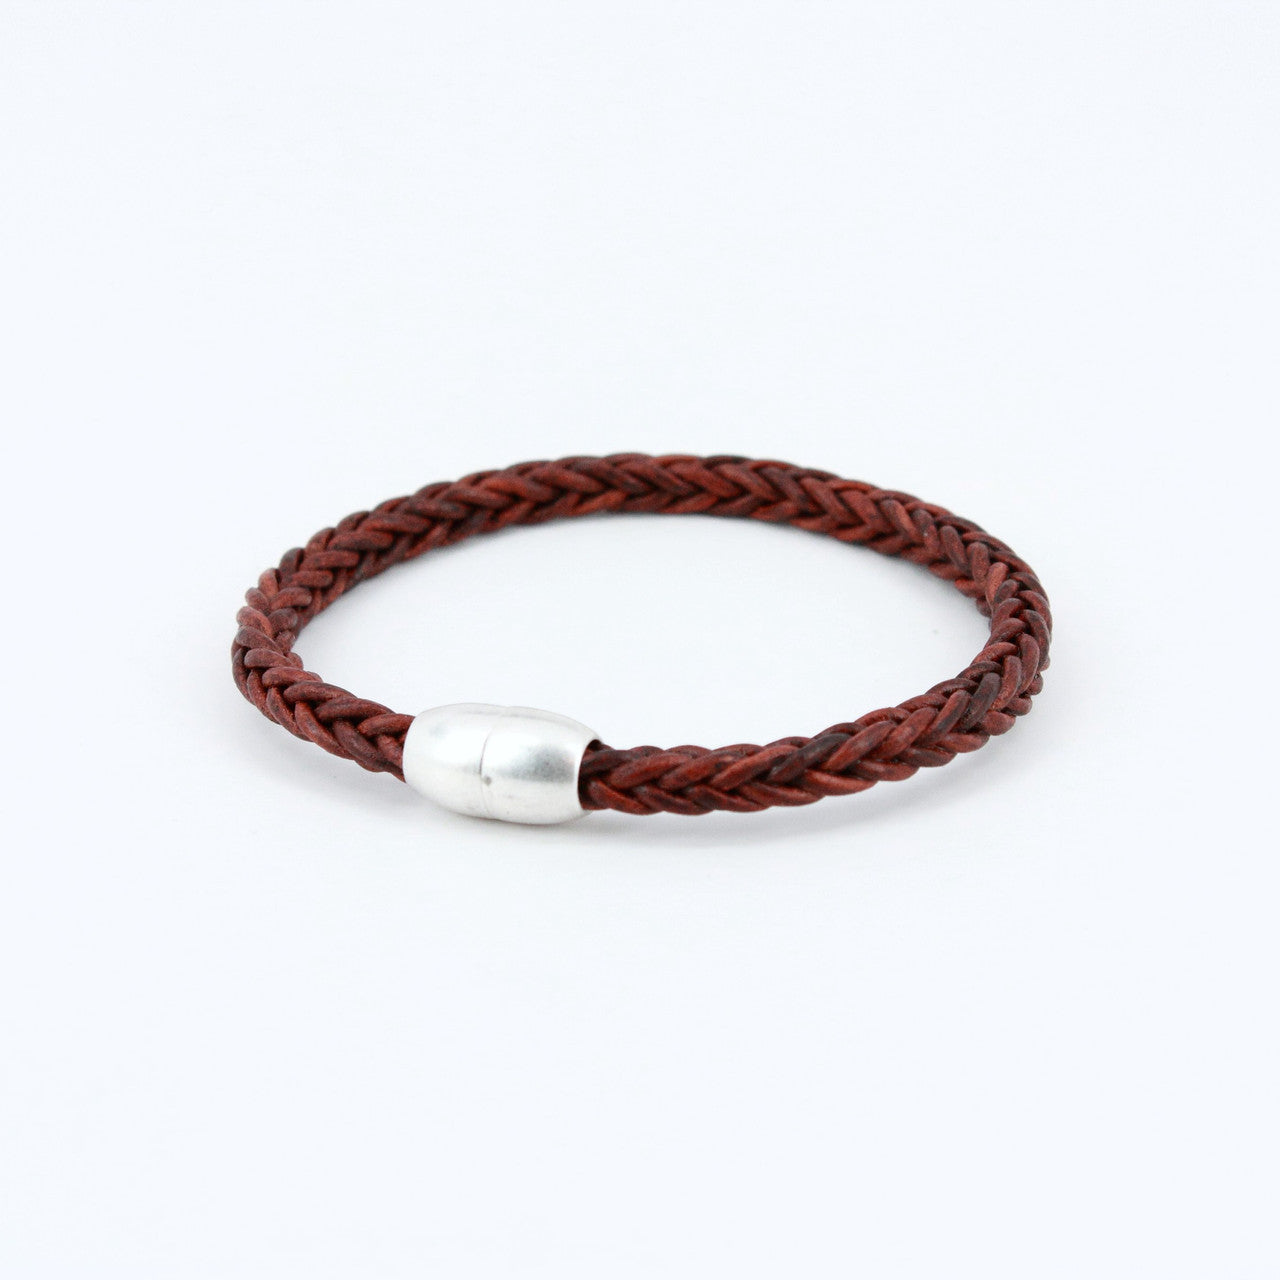 Antiqued Plaited Leather Modo Bracelet with Sterling Plated Closure in Choice of Colors by Torino Leather